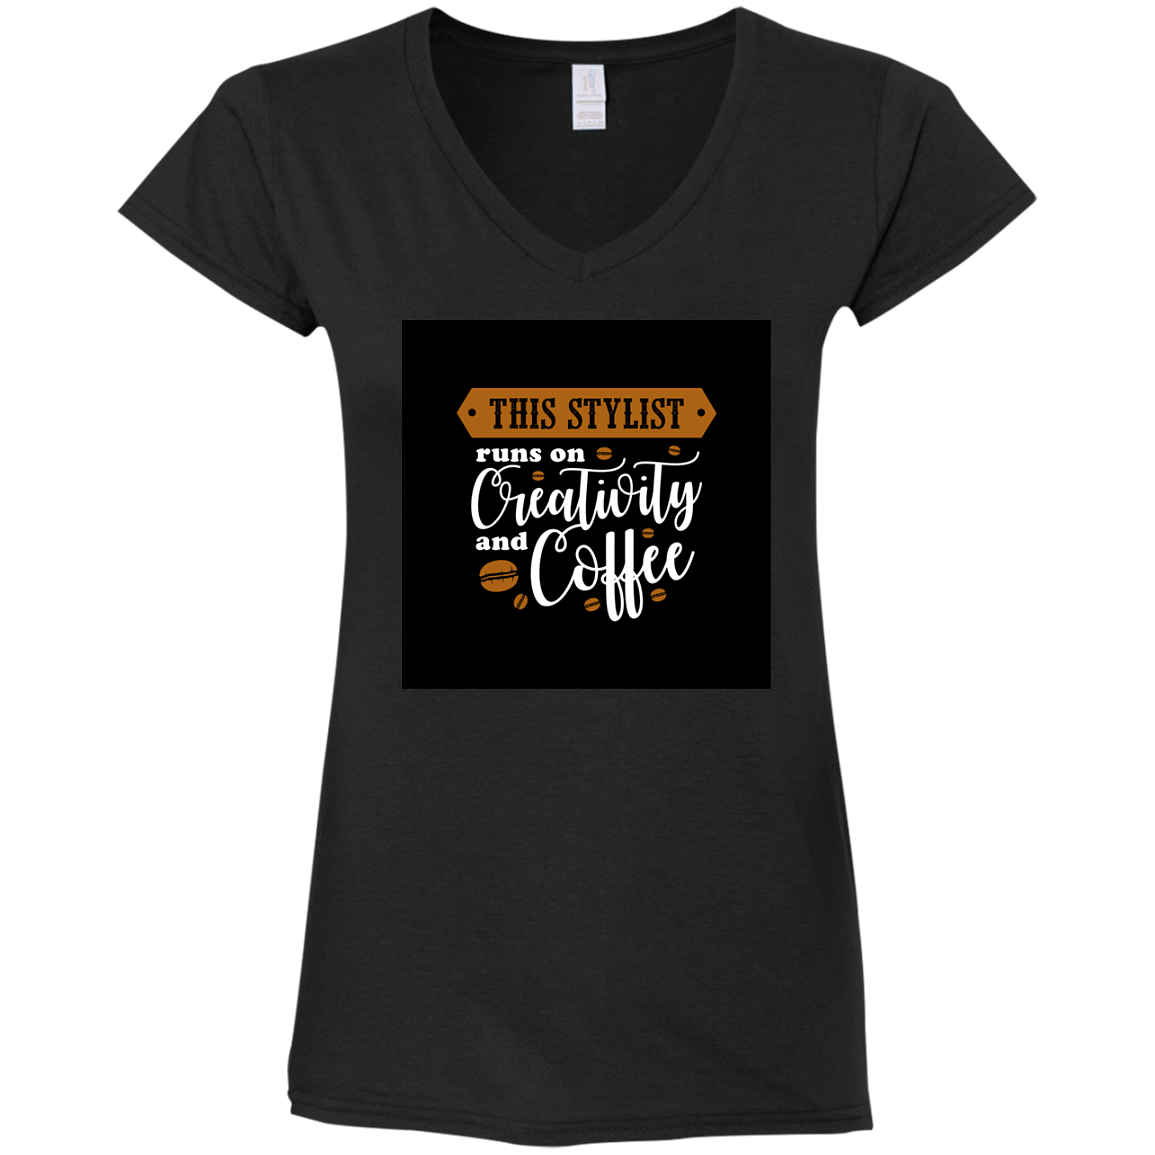 G64VL Ladies' Fitted Softstyle 4.5 oz V-Neck T-Shirt